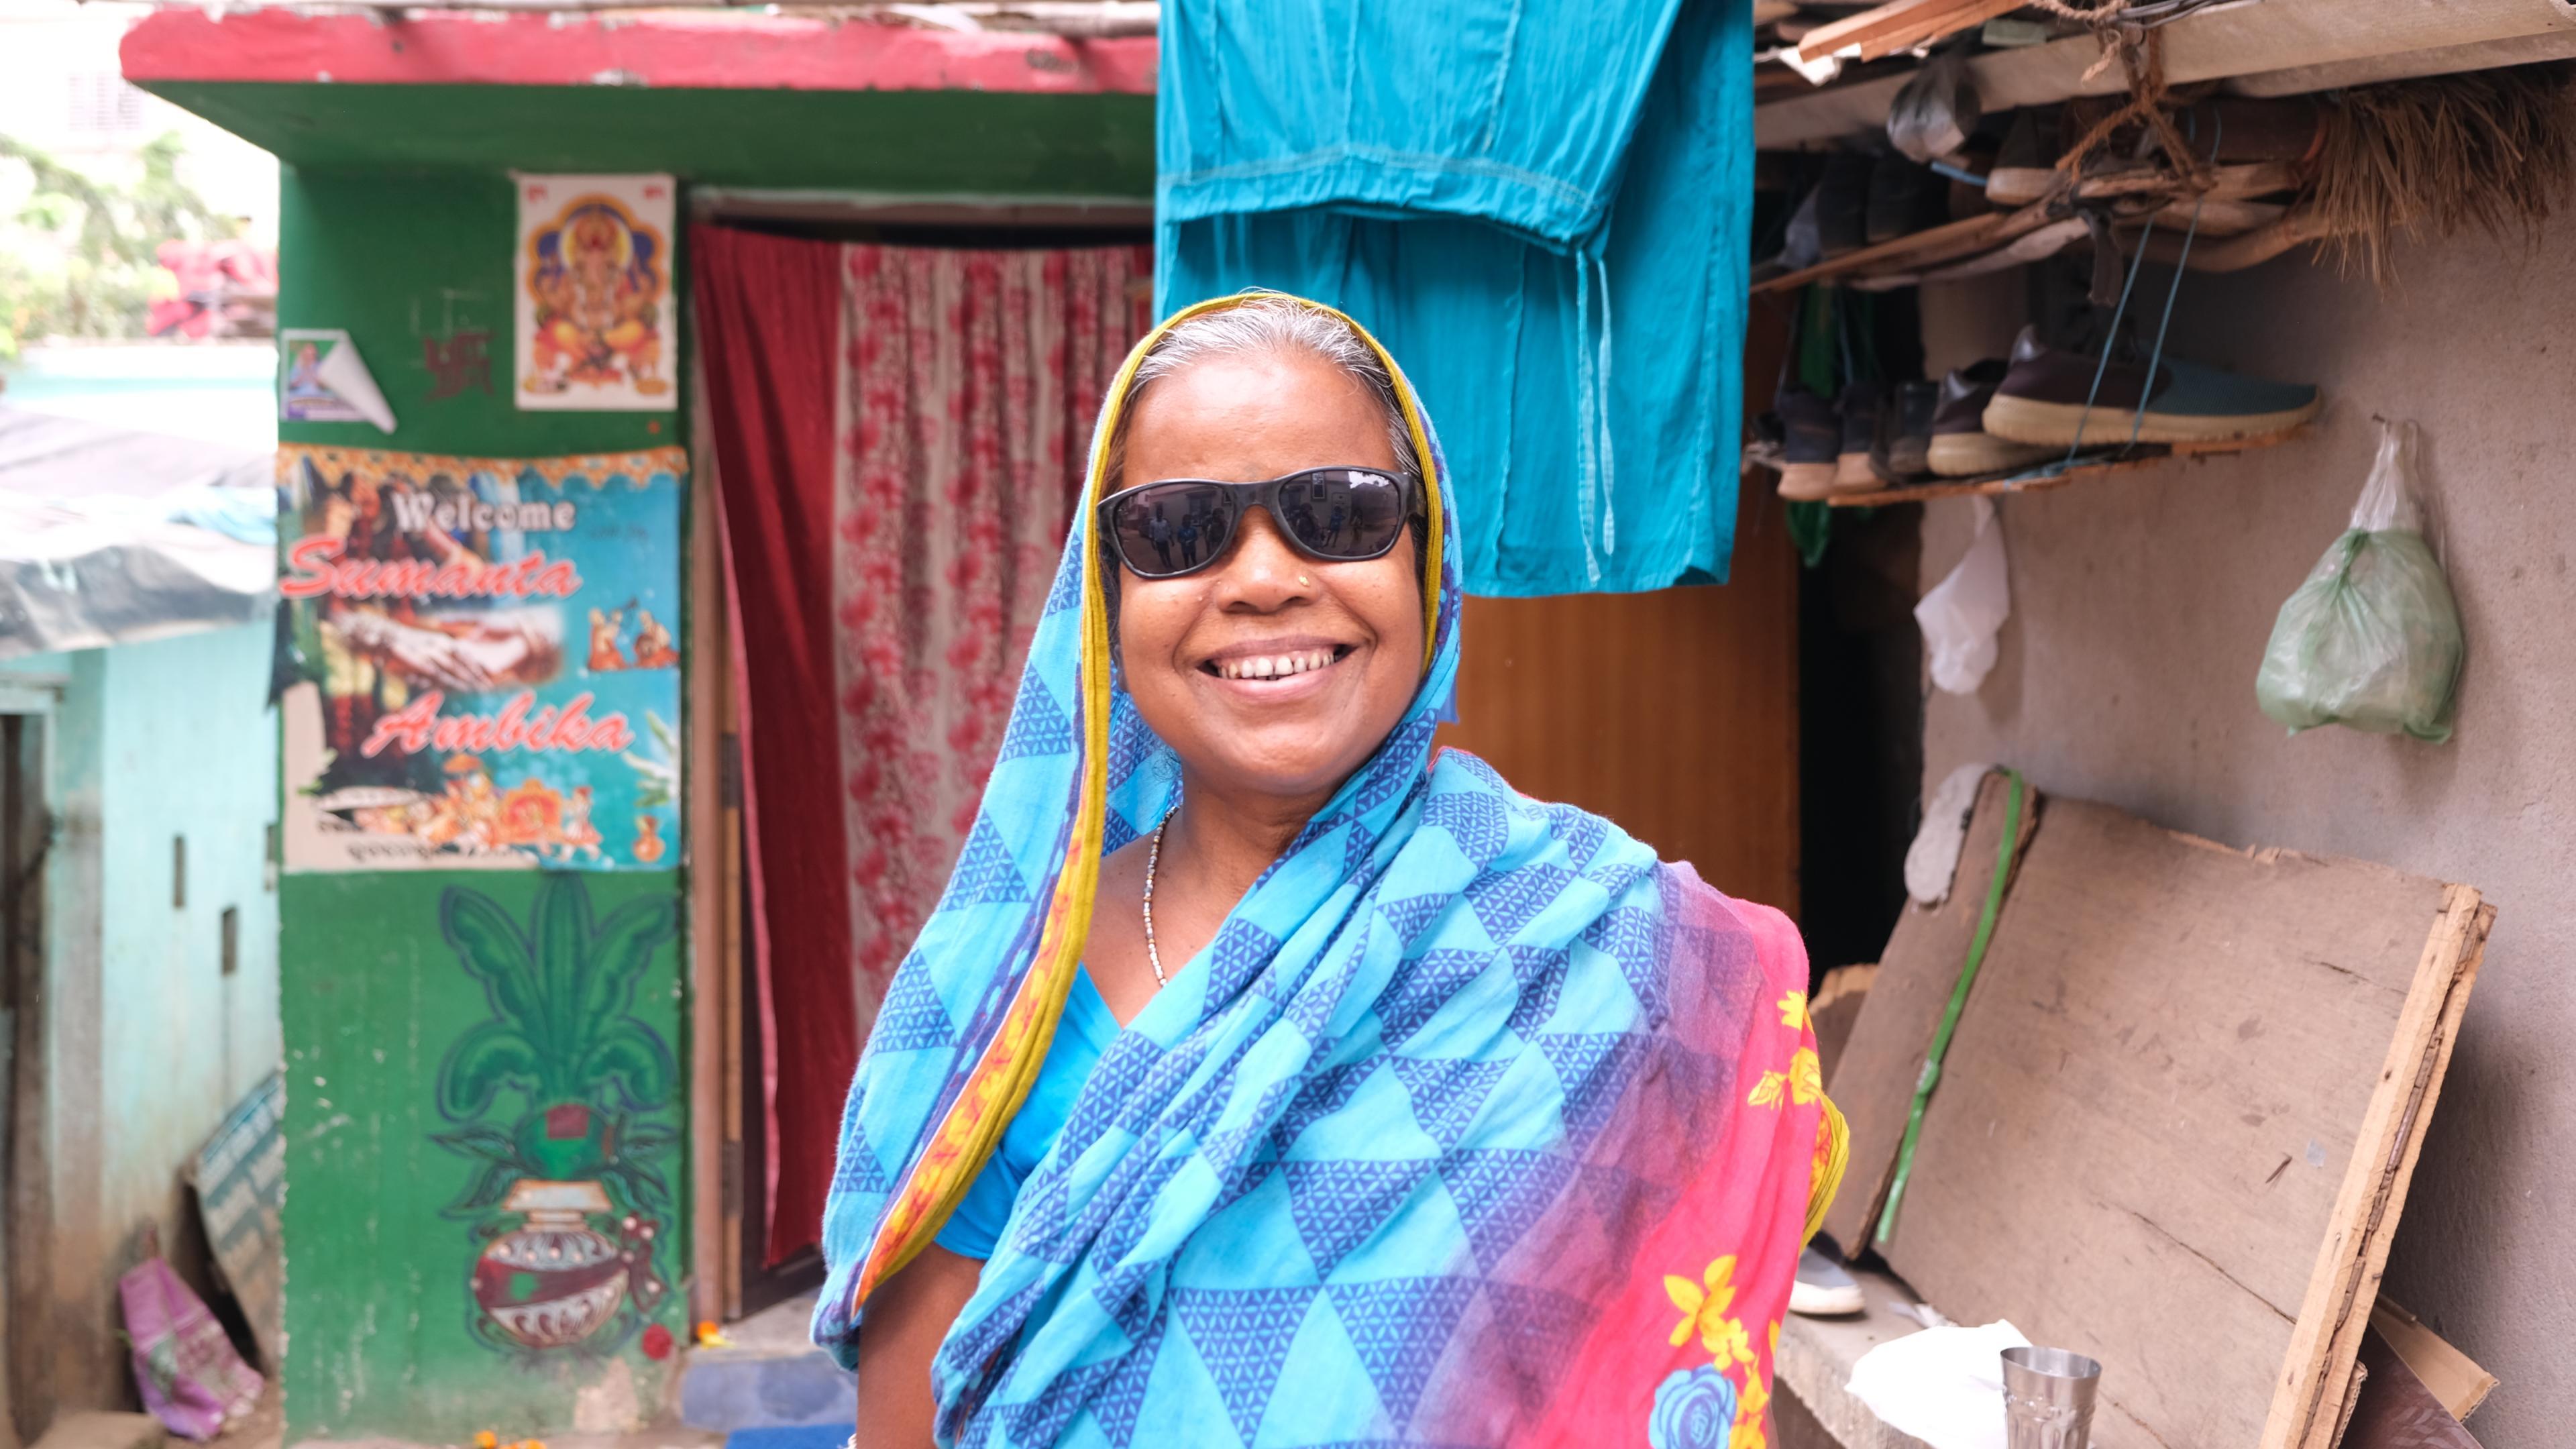 Traditionally dressed woman from India, wearing sunglasses